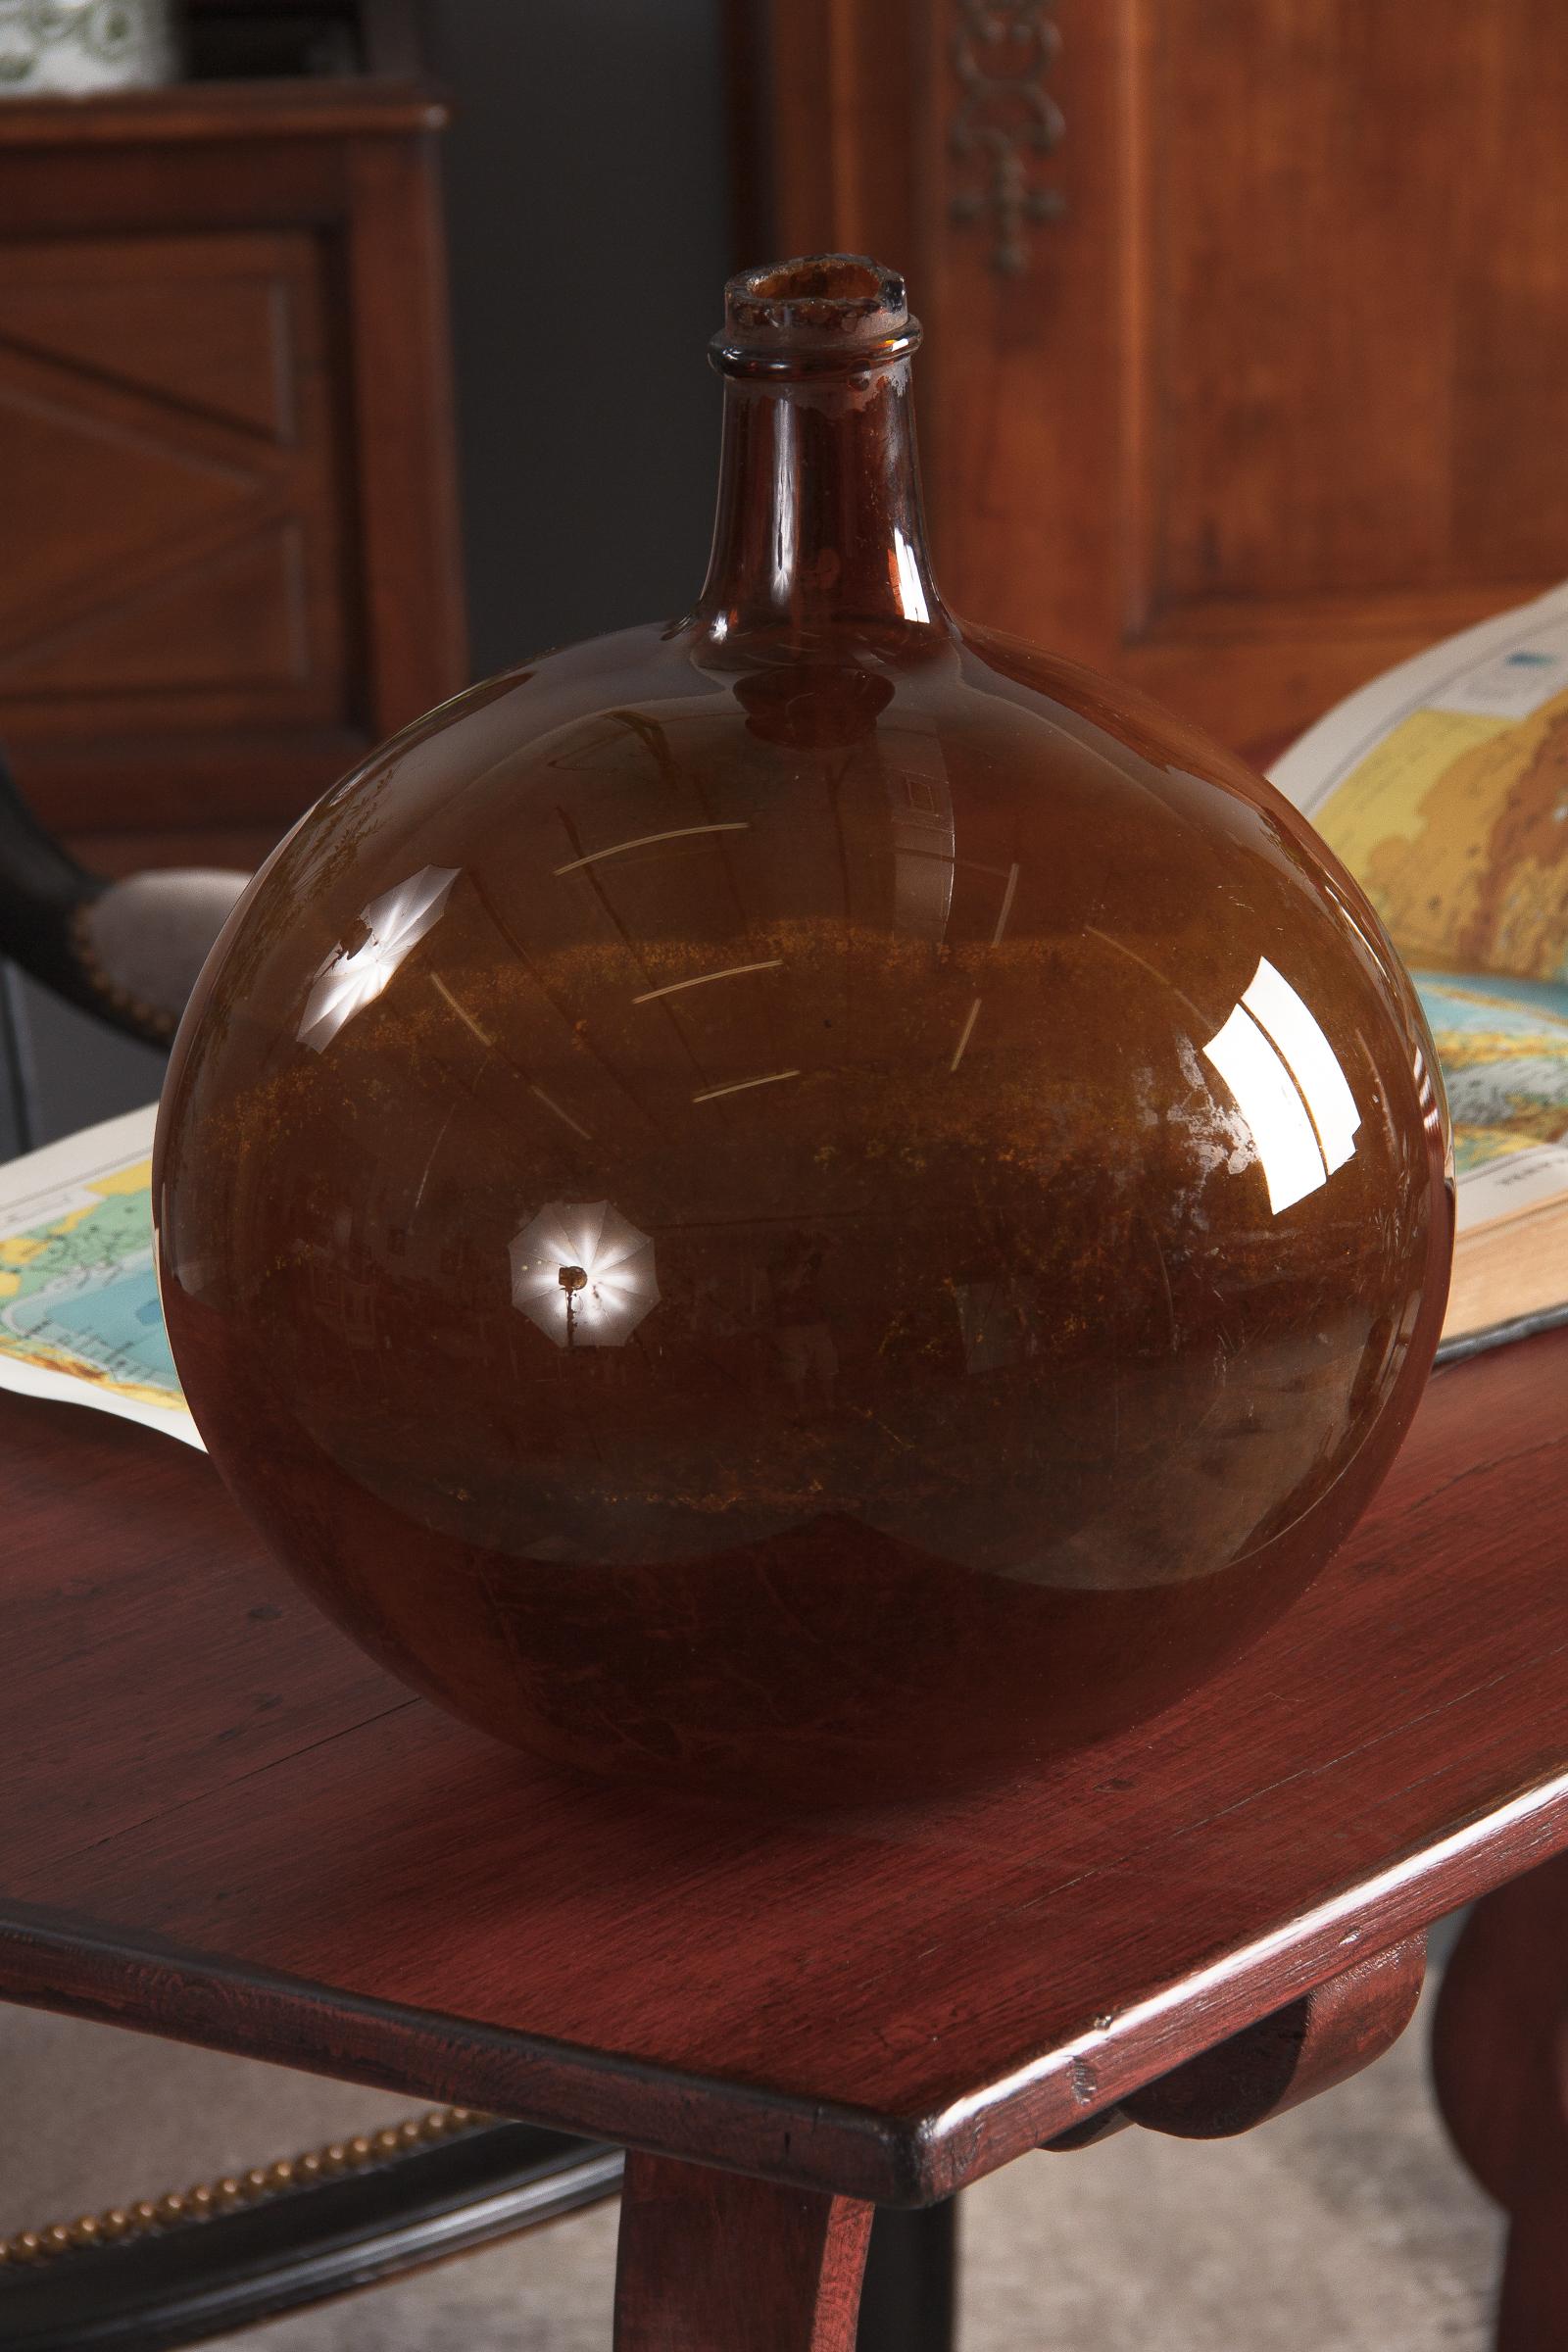 A 19th century glass Bonbonne from Provence in brown tones. The shape is quite rare.